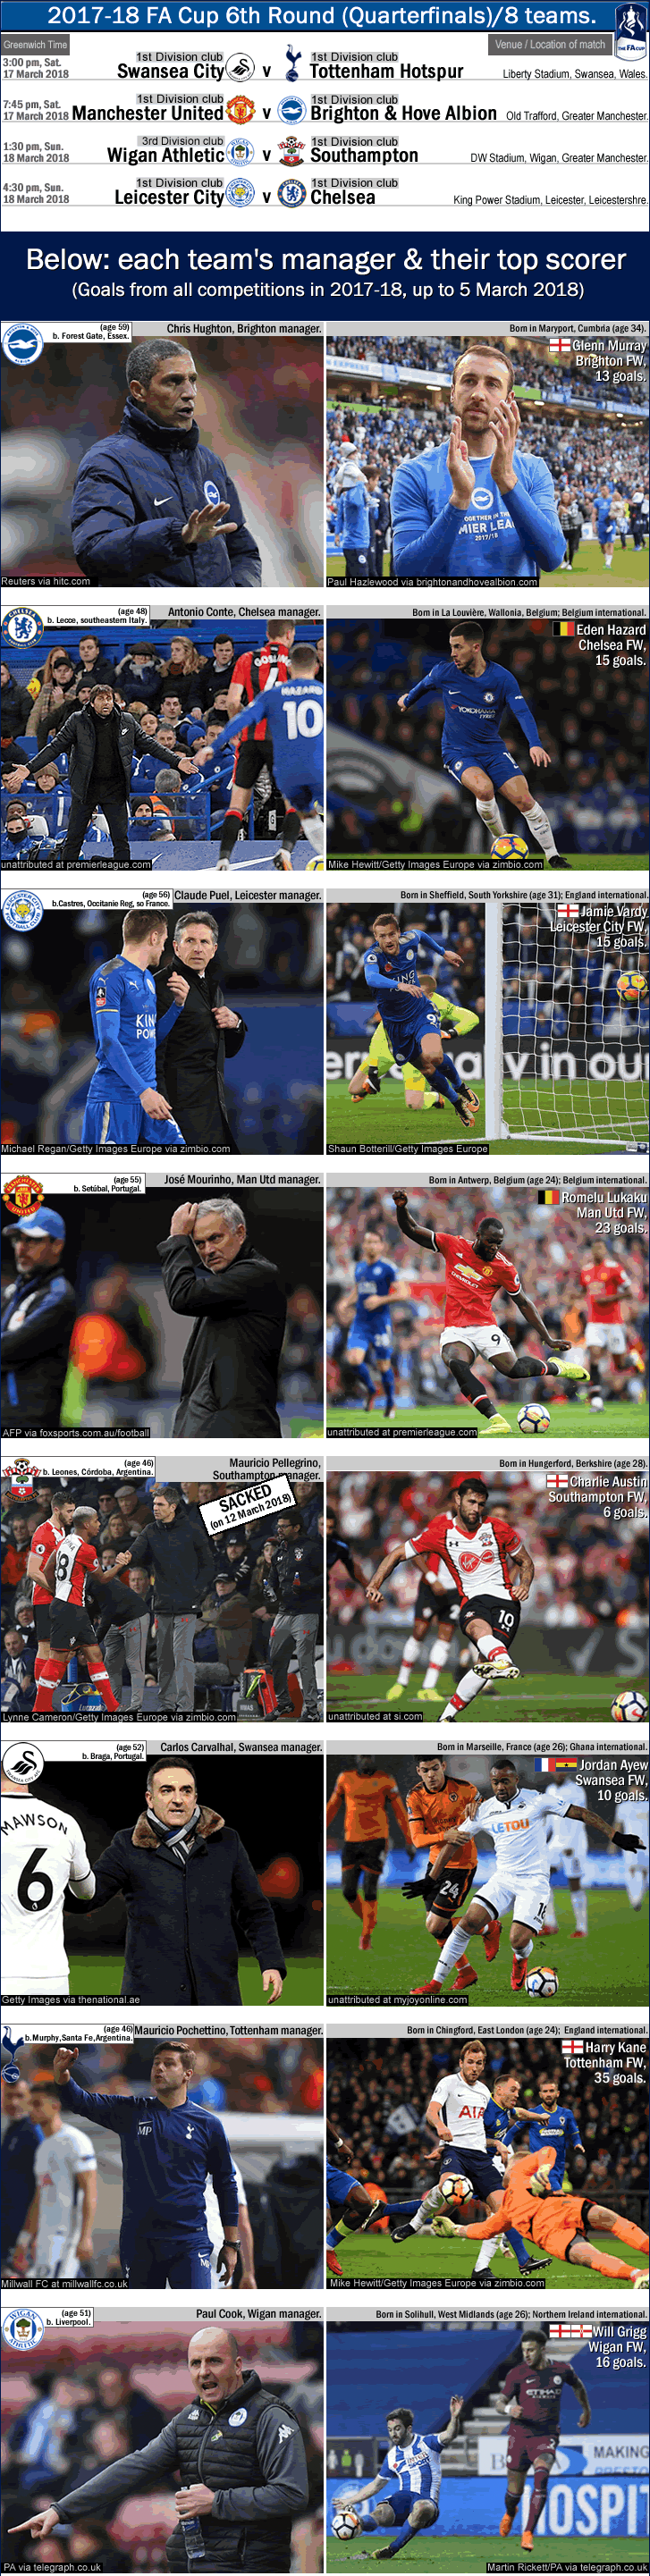 2017-18_fa-cup_6th-round_8-teams_managers-and-top-scorers_brighton_chelsea_leicester_manchester-utd_southampton_swansea_tottenham_wigan_i_.gif